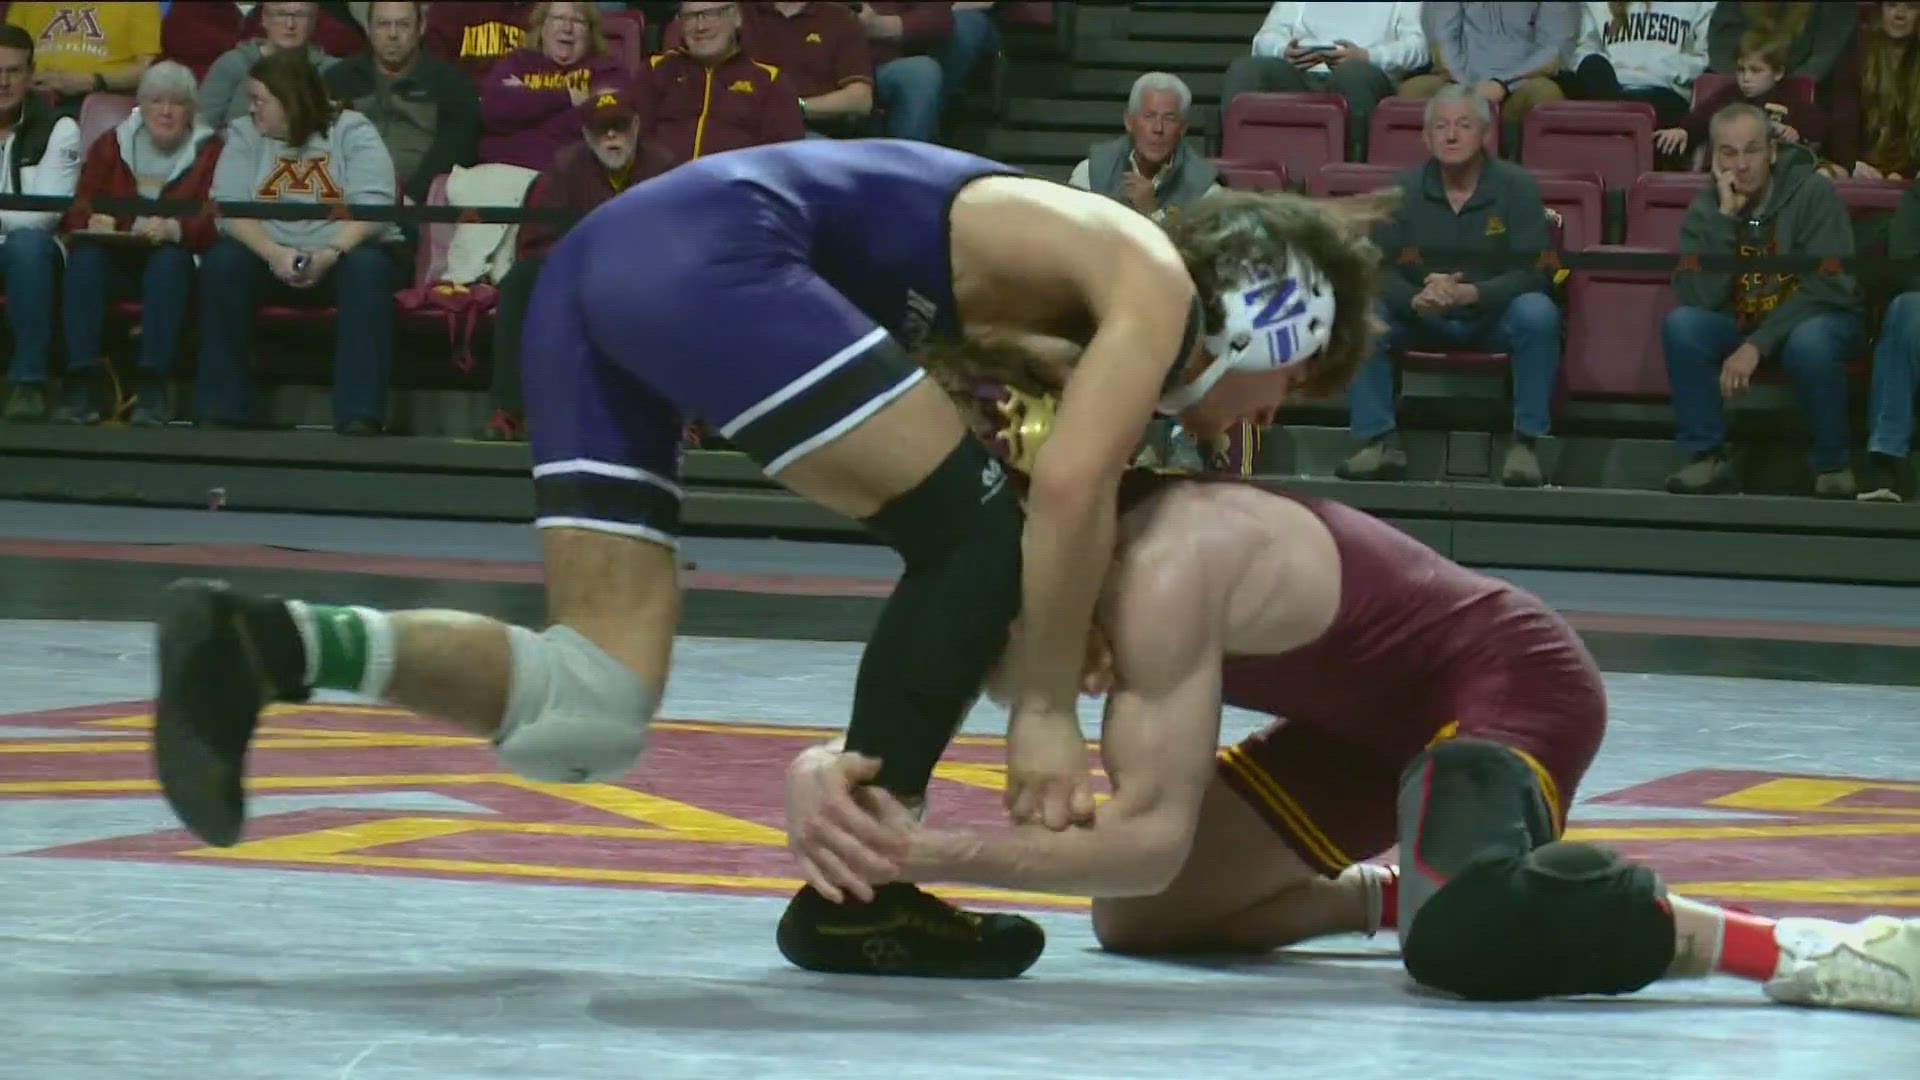 The Gophers highest-ranked wrestler, senior Michael Blockhus (#5 at 157 pounds), beat #18 Trevor Chumbley with an 8-5 decision.